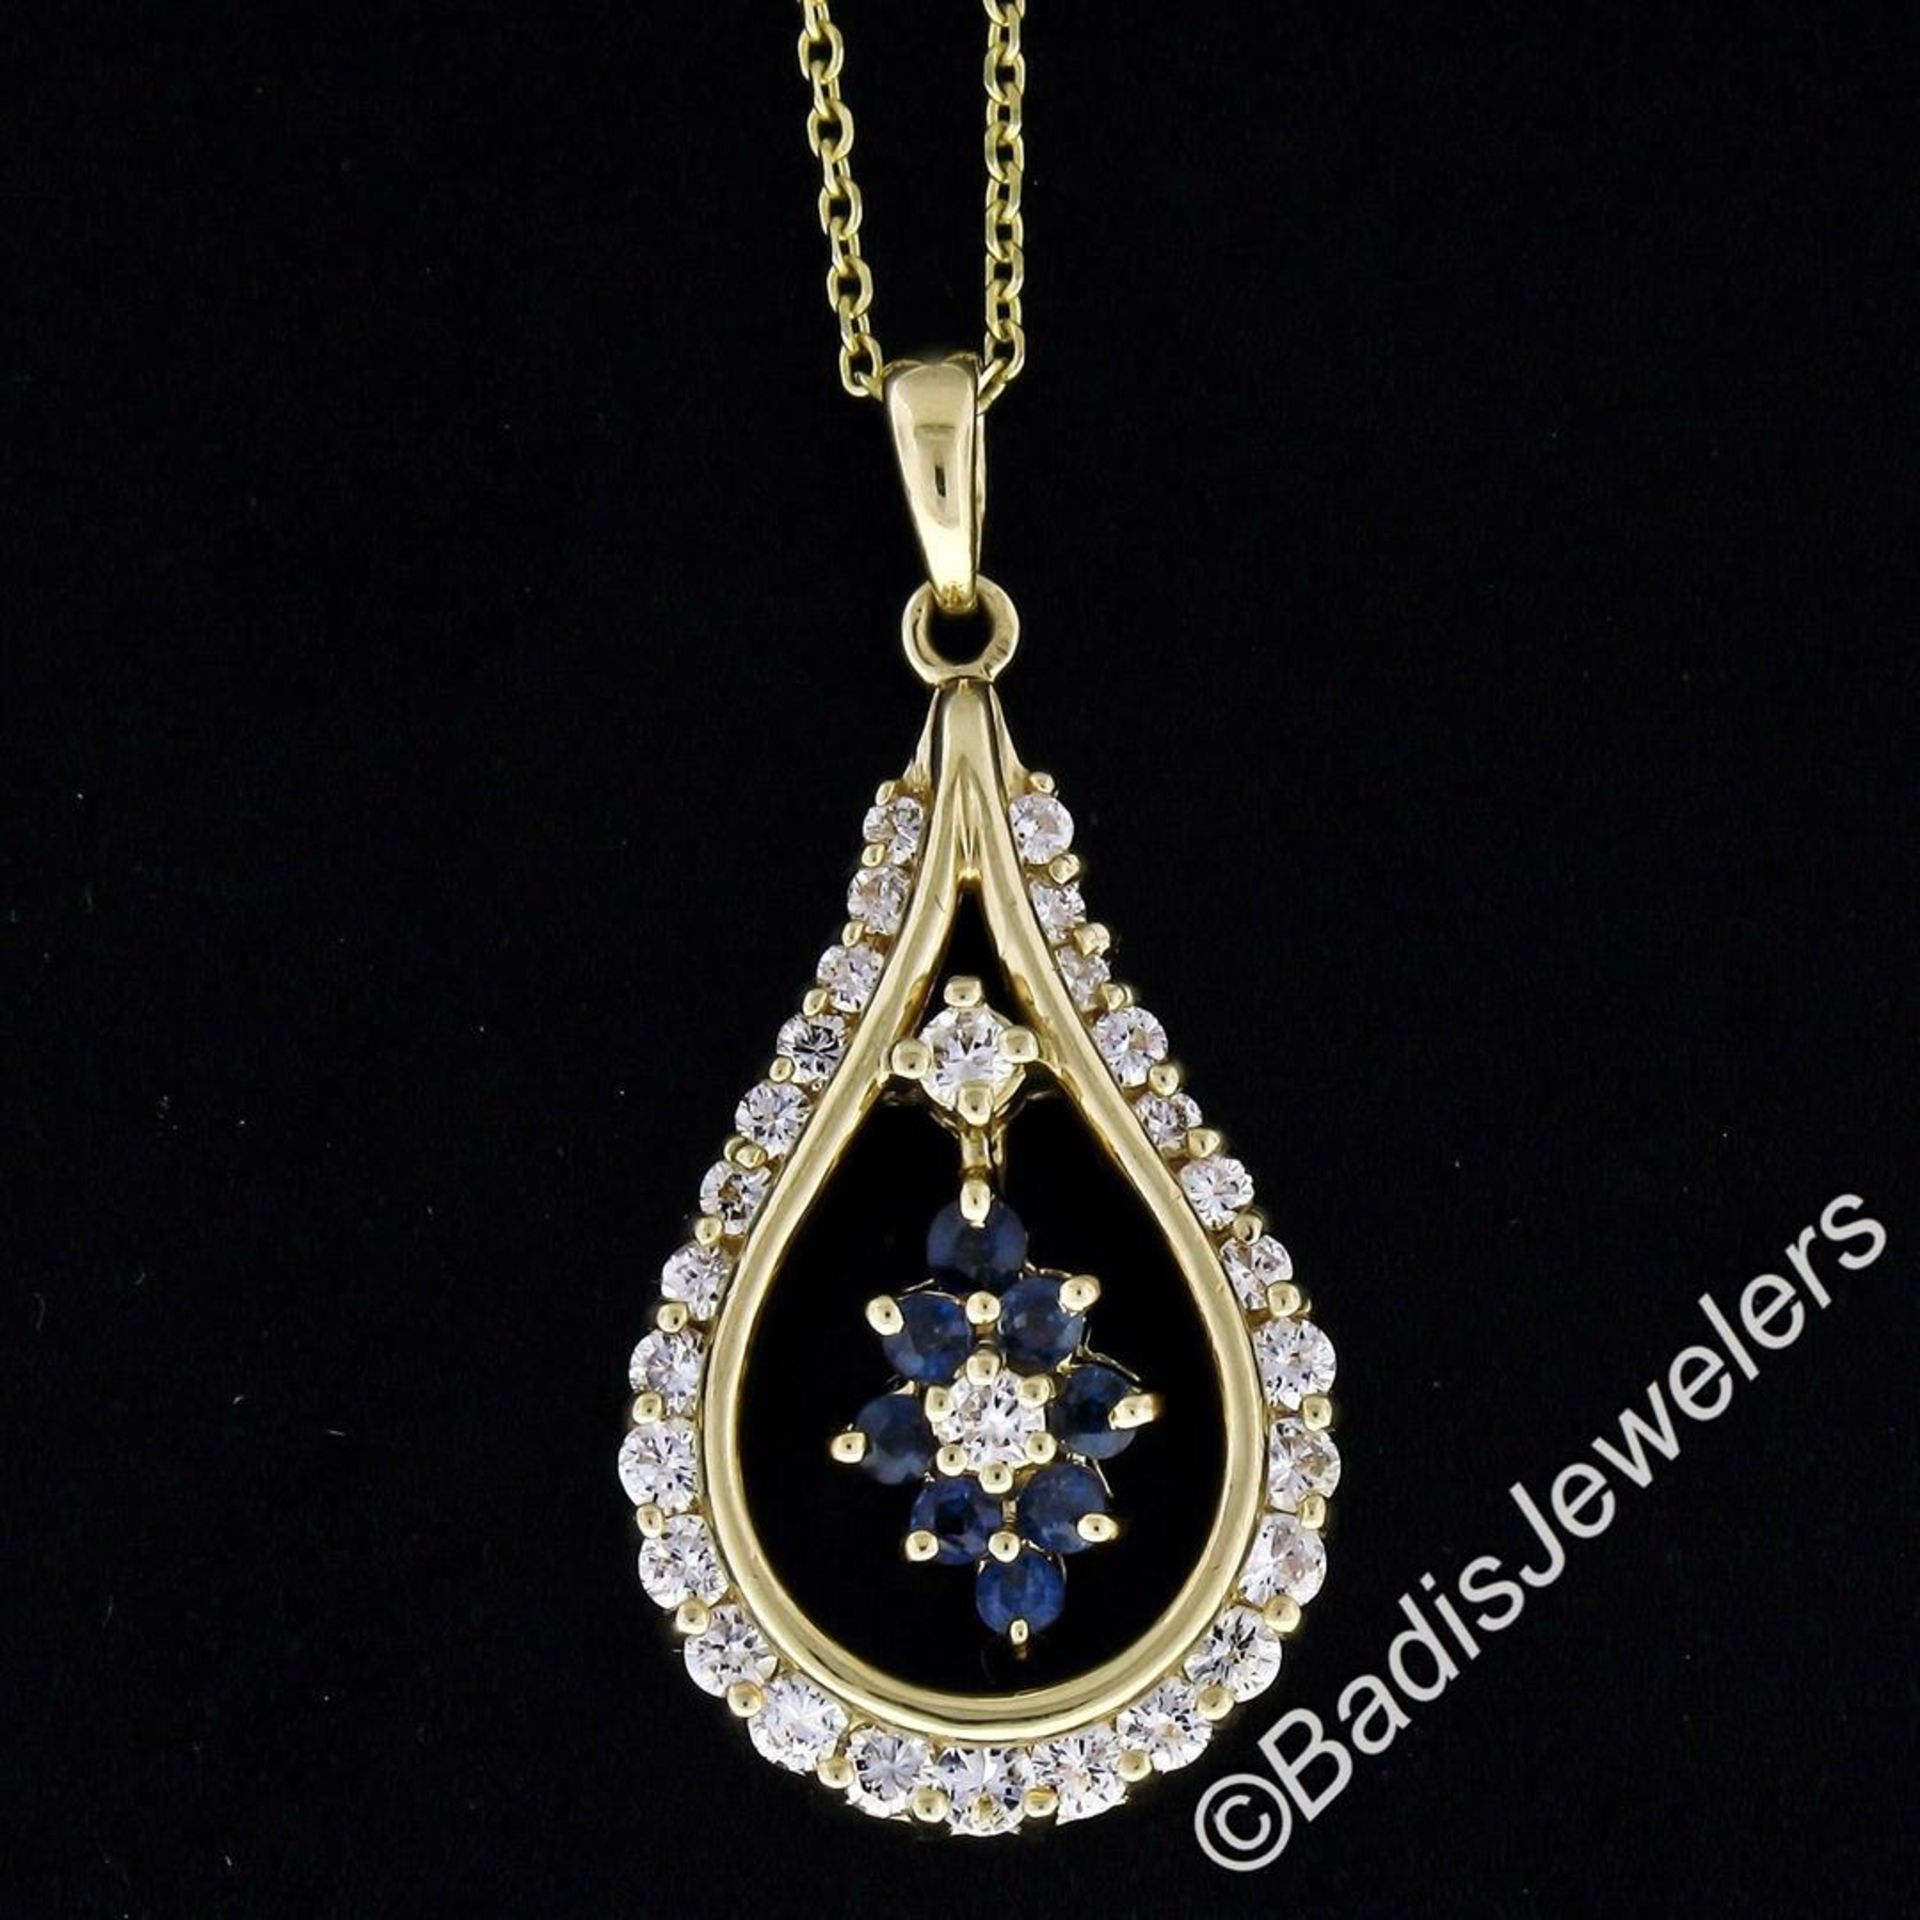 14kt Yellow Gold 1.22ctw Diamond and Sapphire Tear Drop Dangle Pendant Necklace - Image 2 of 7